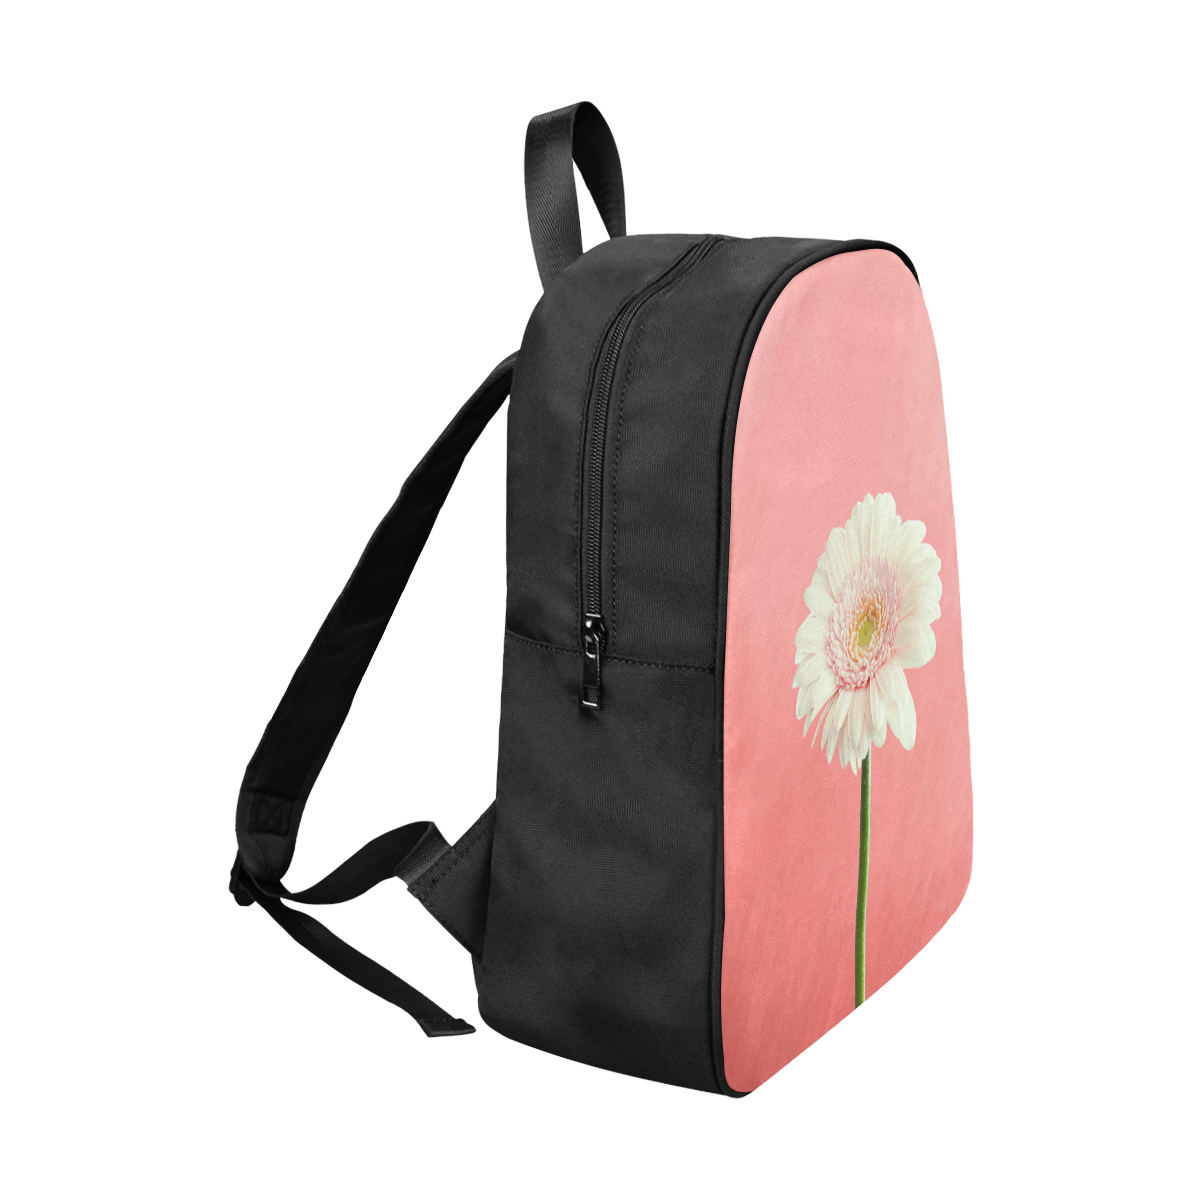 Gerbera Daisy - White Flower on Coral Pink Fabric School Backpack (Model 1682) (Large)